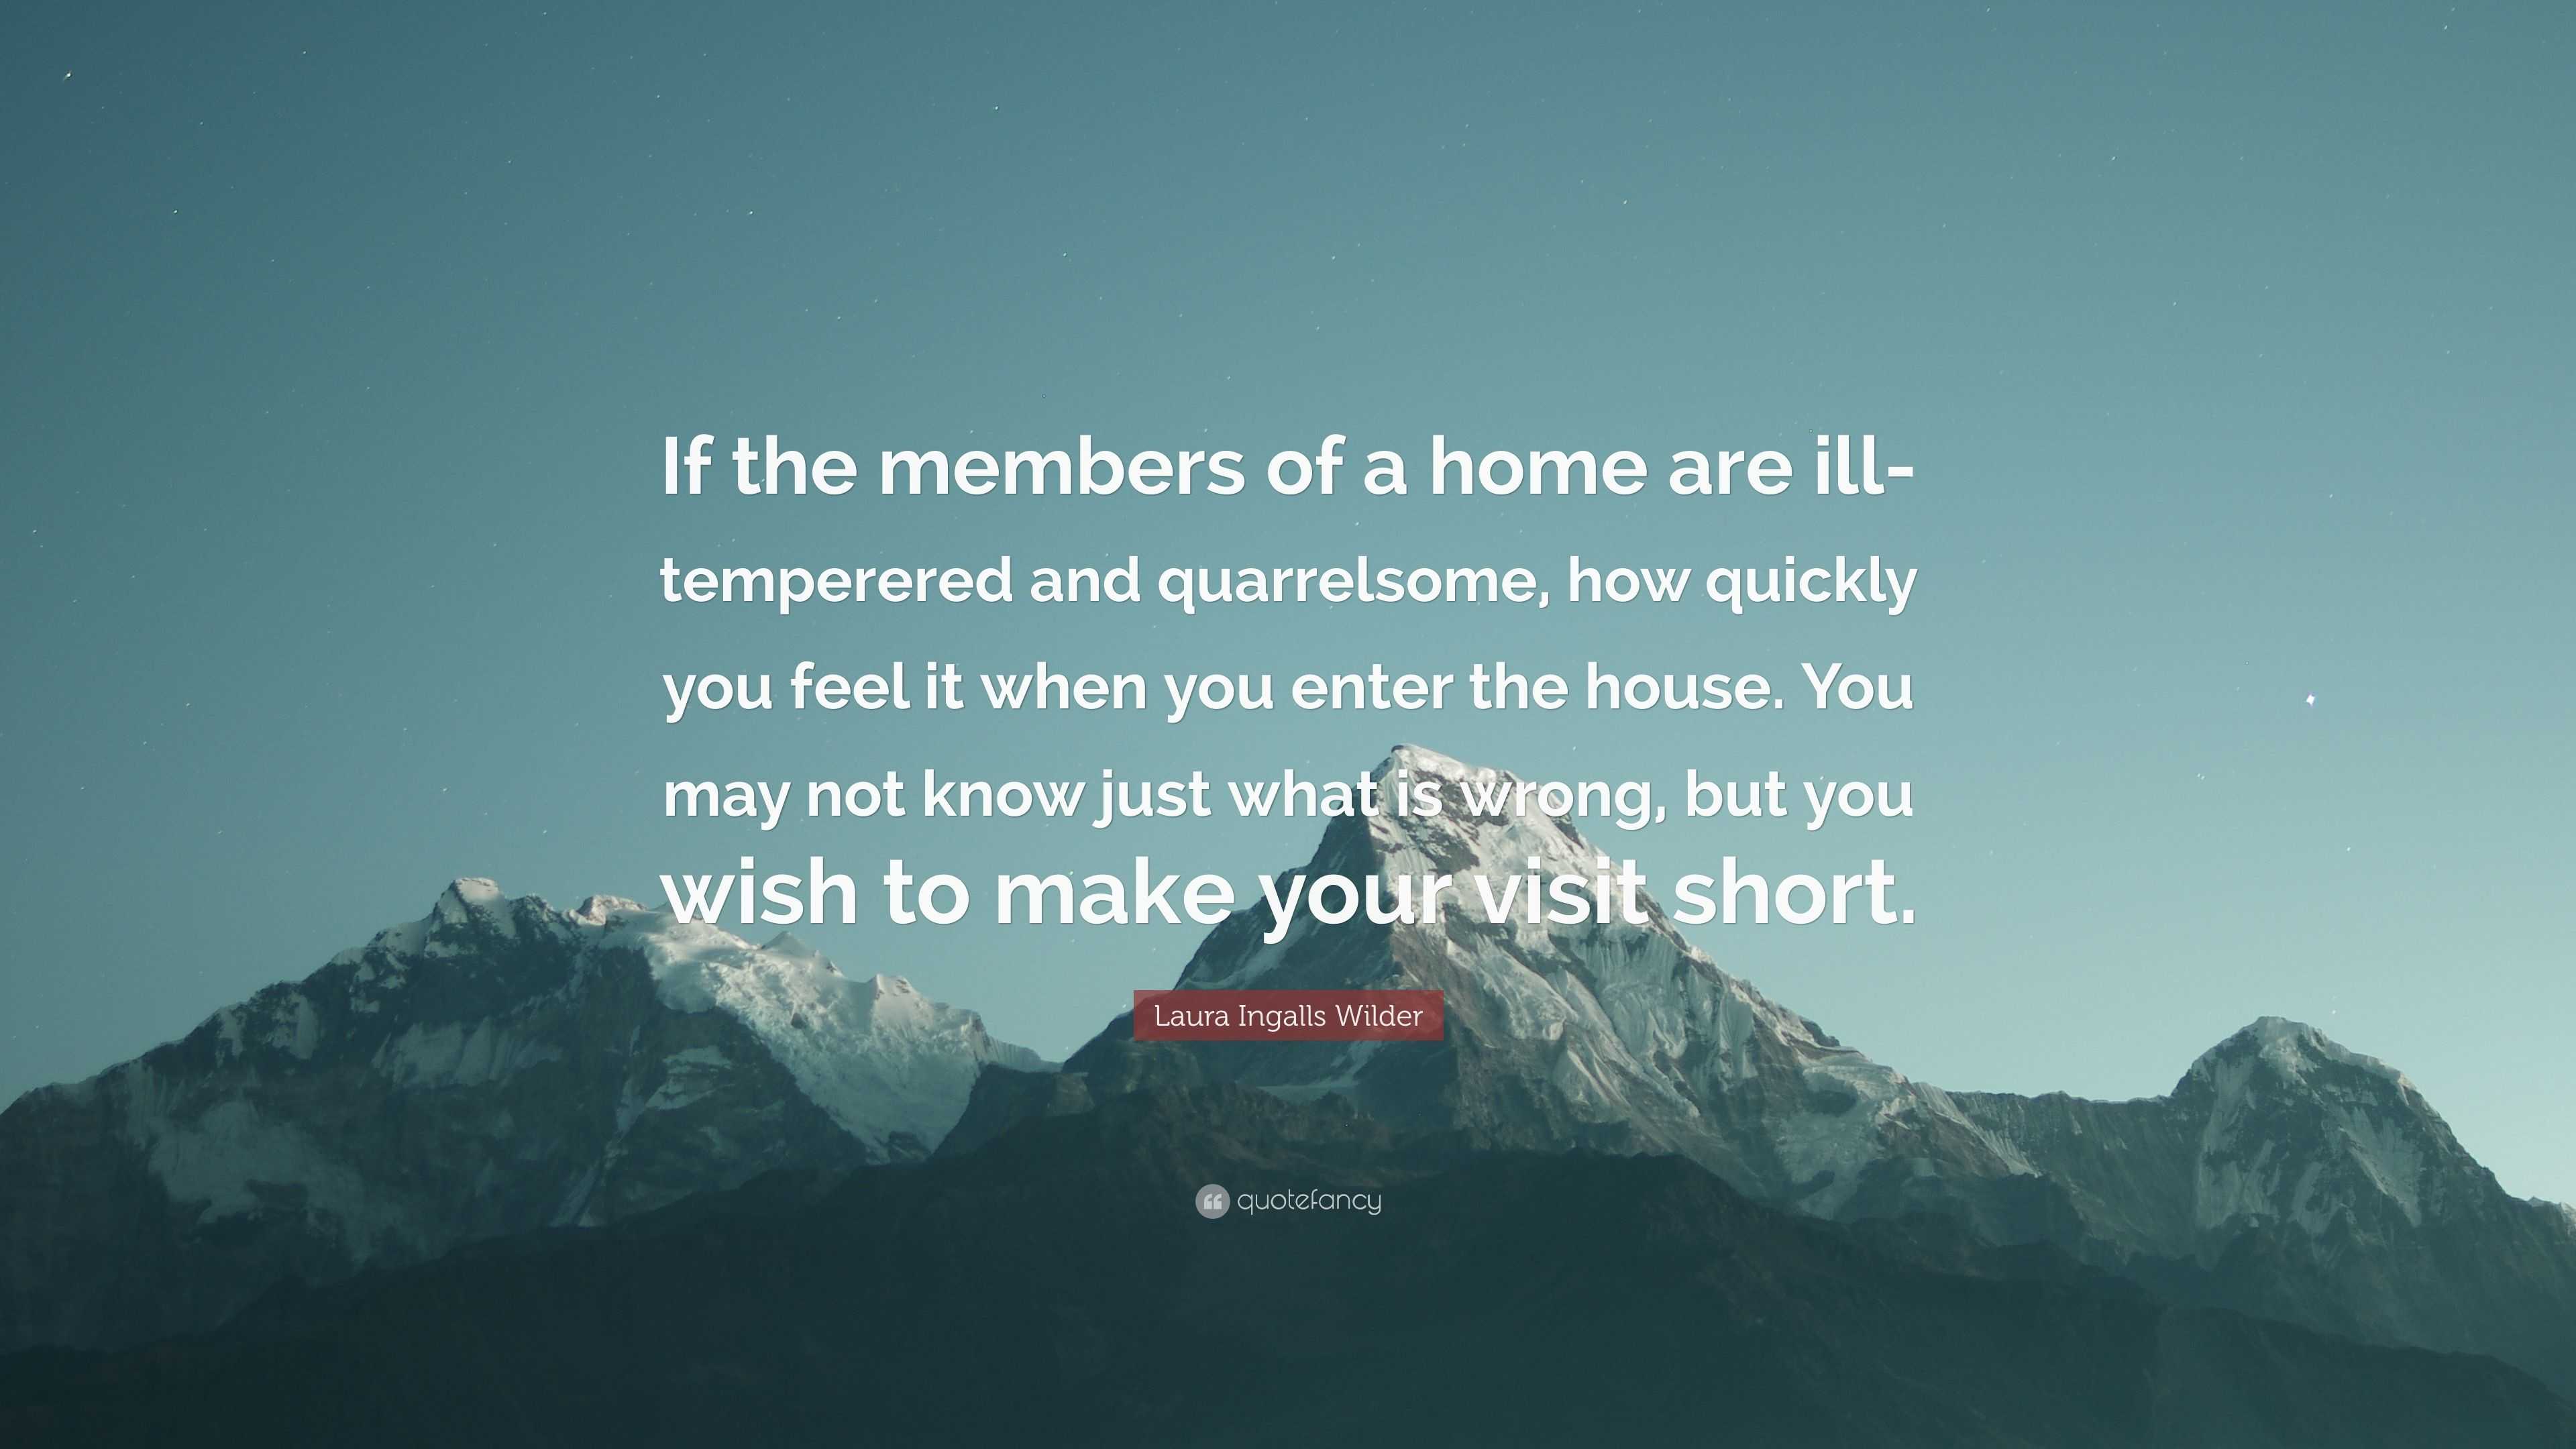 Laura Ingalls Wilder Quote: “If the members of a home are ill-temperered  and quarrelsome